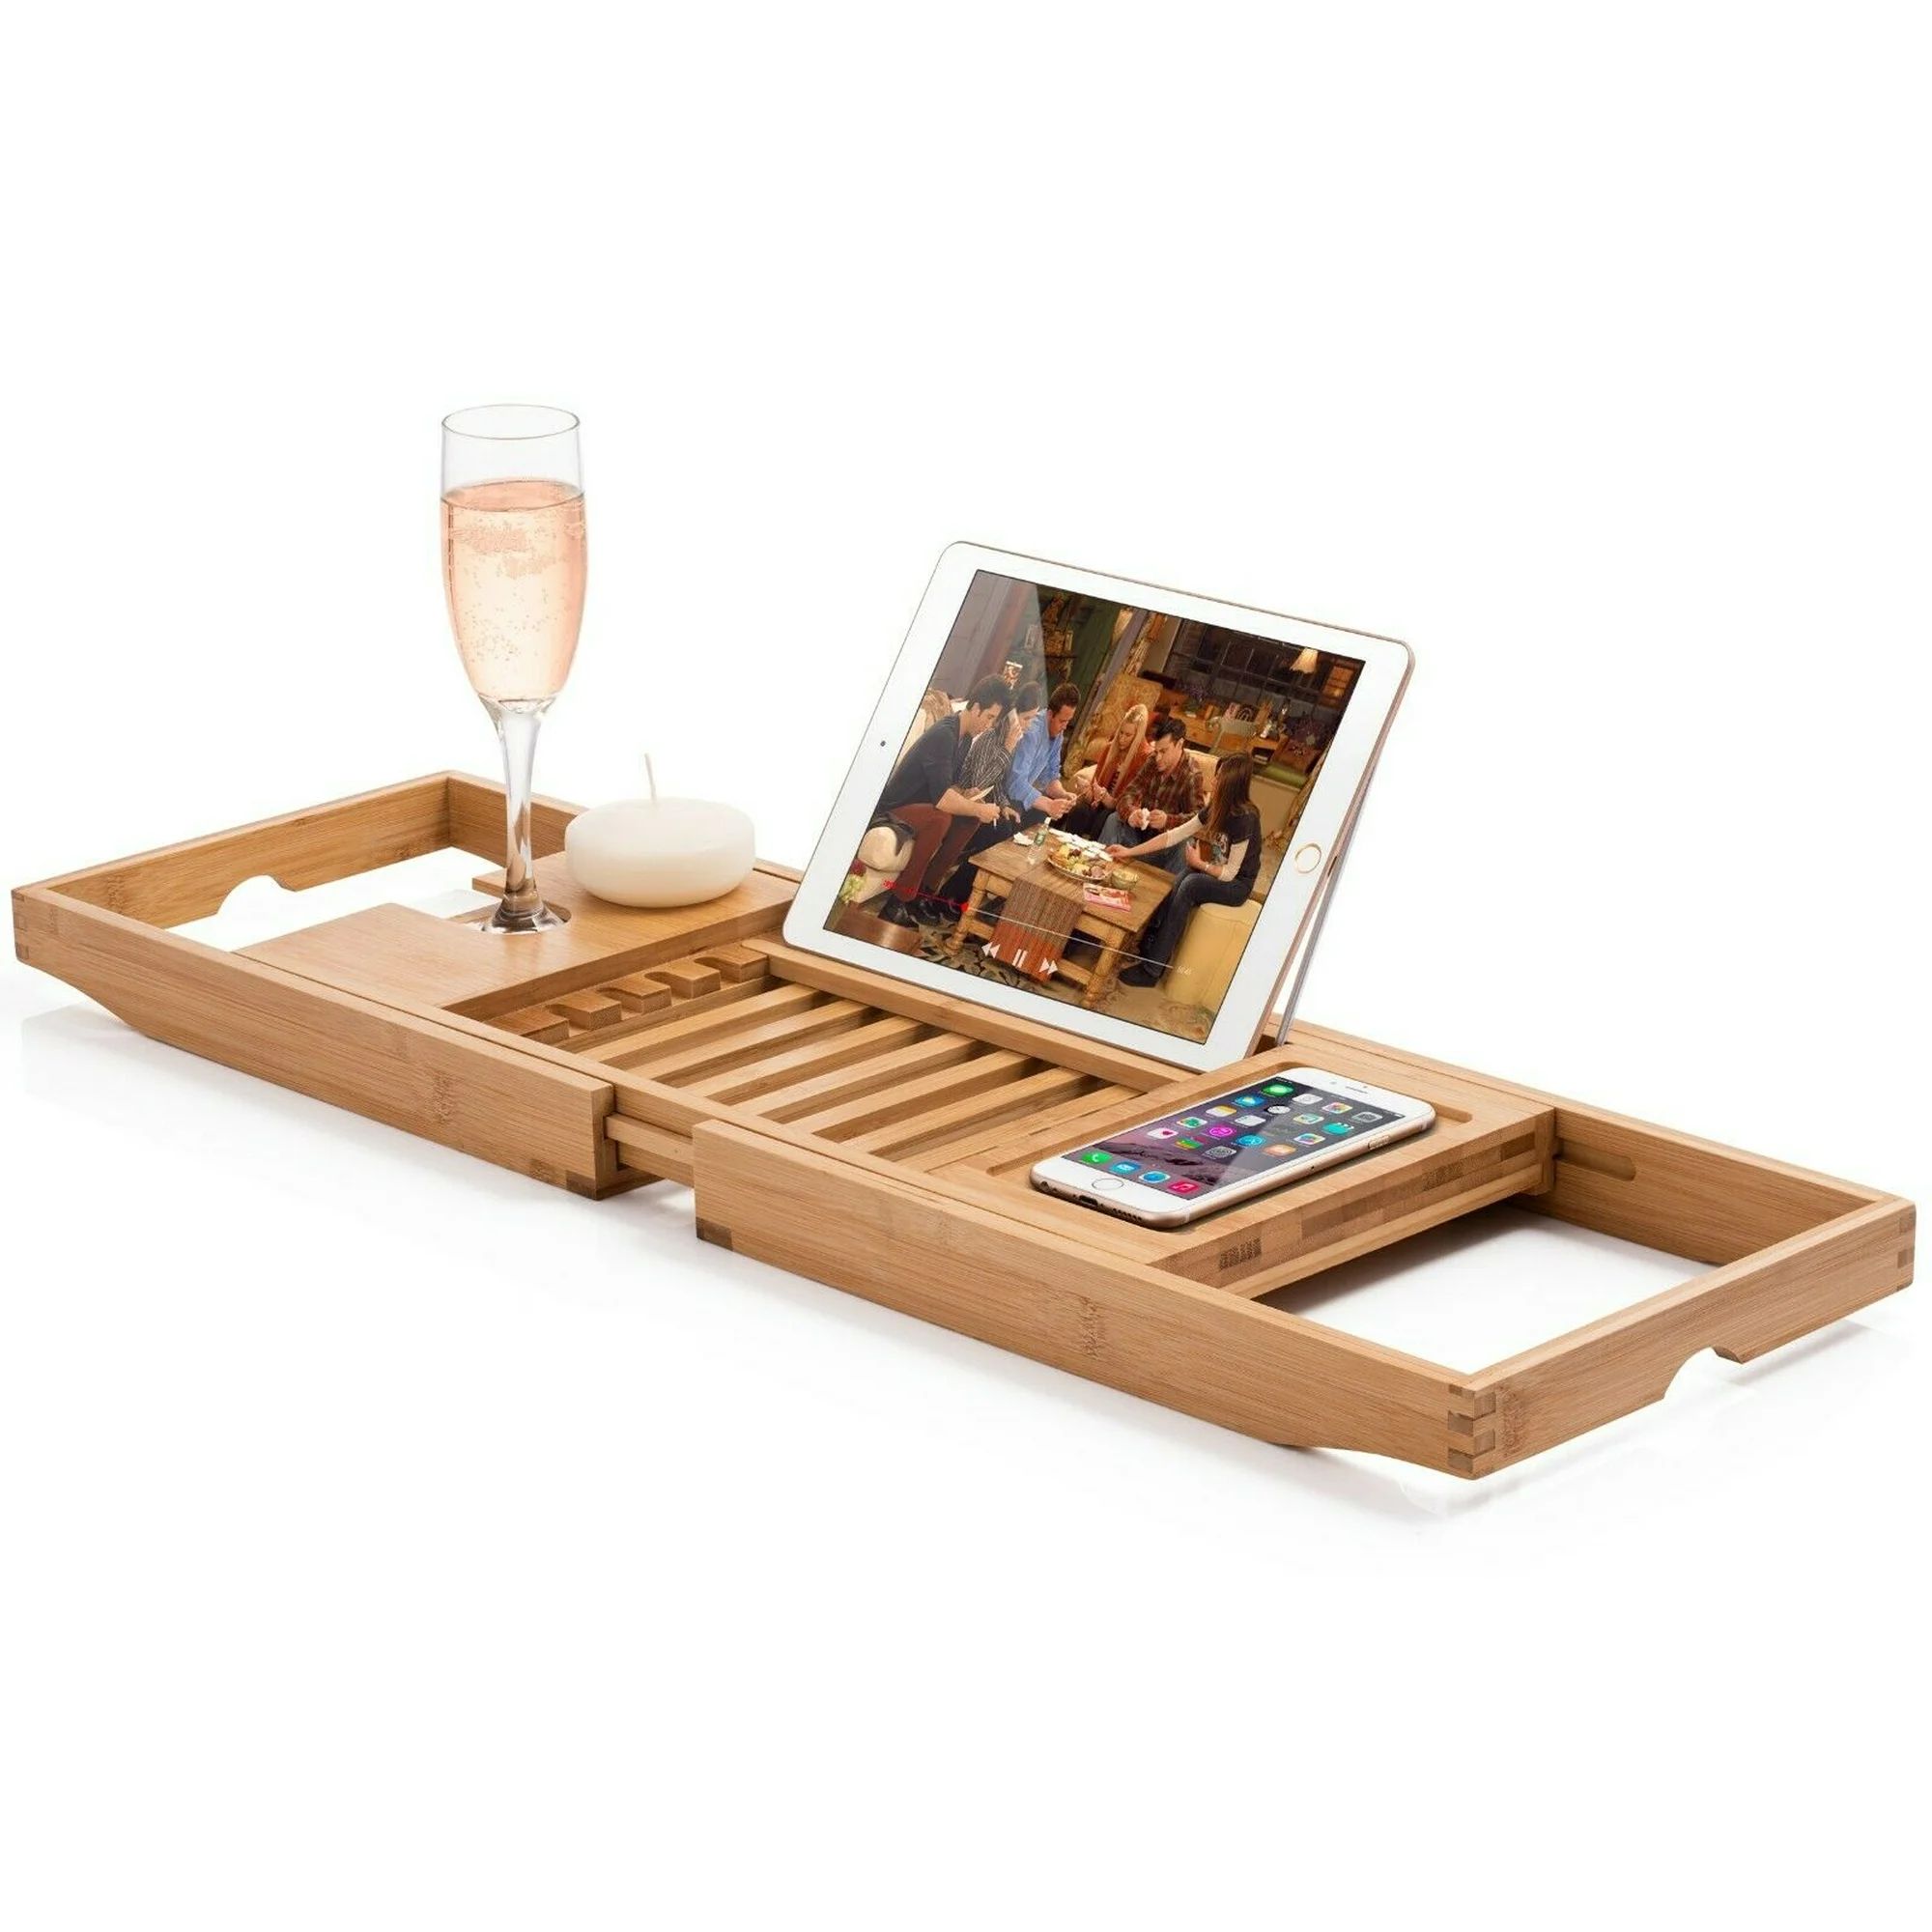 Bambusi Bathtub Caddy with Extendable Sides, Wine Glass Holder, Book Stand and Phone Tray | Walmart (US)